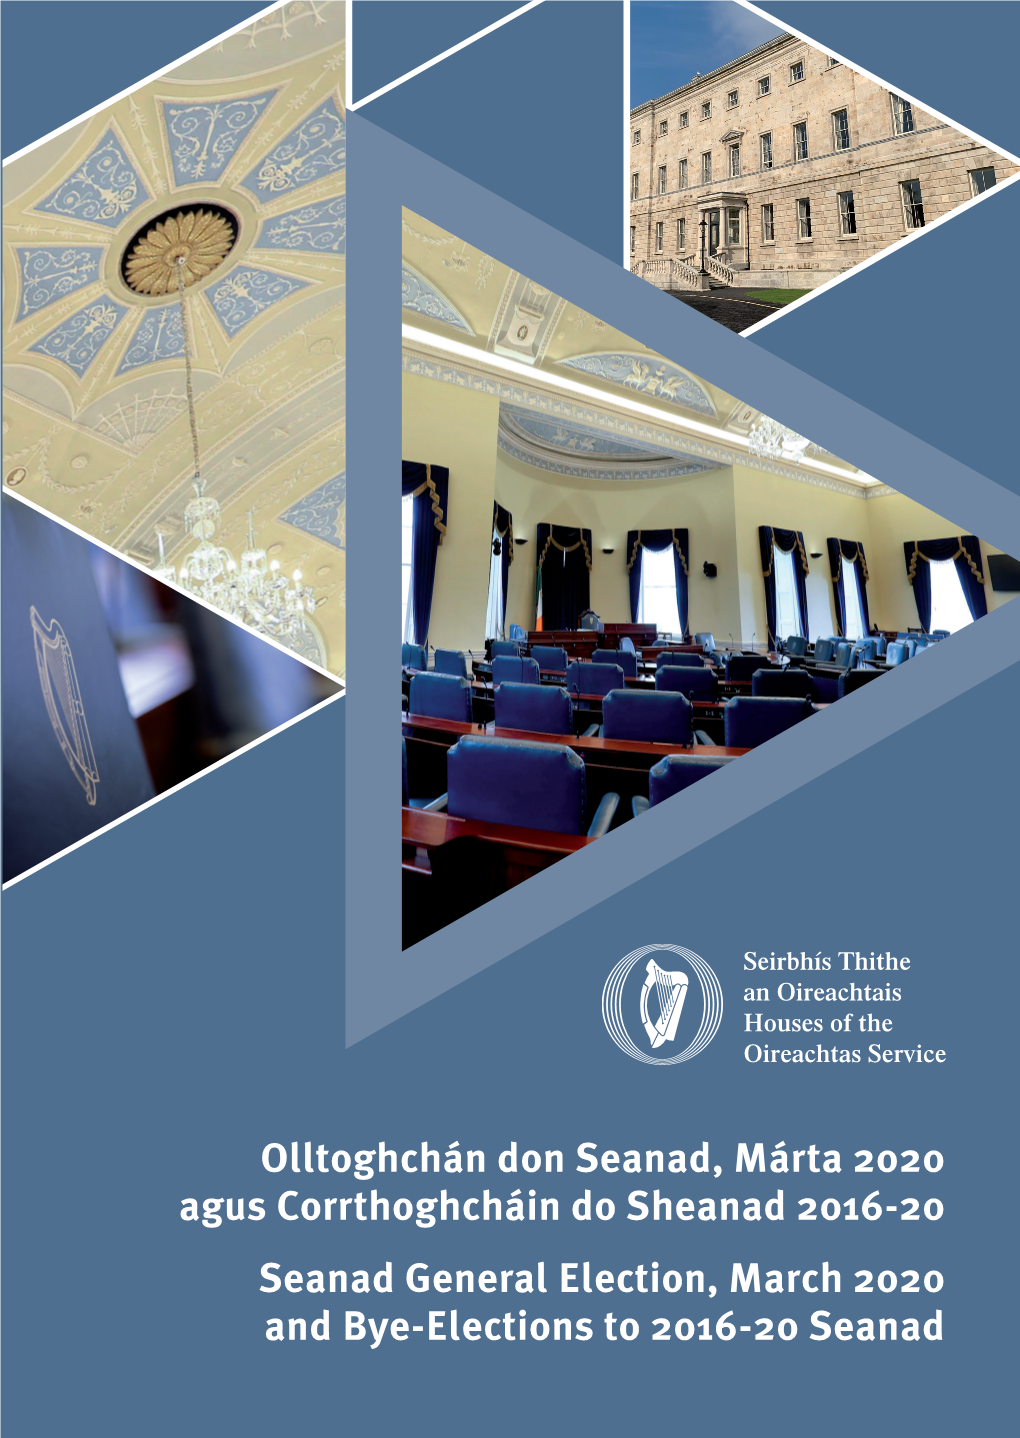 Olltoghchán Don Seanad, Márta 2020 Agus Corrthoghcháin Do Sheanad 2016-20 Download Our App Seanad General Election, March 2020 and Bye-Elections to 2016-20 Seanad